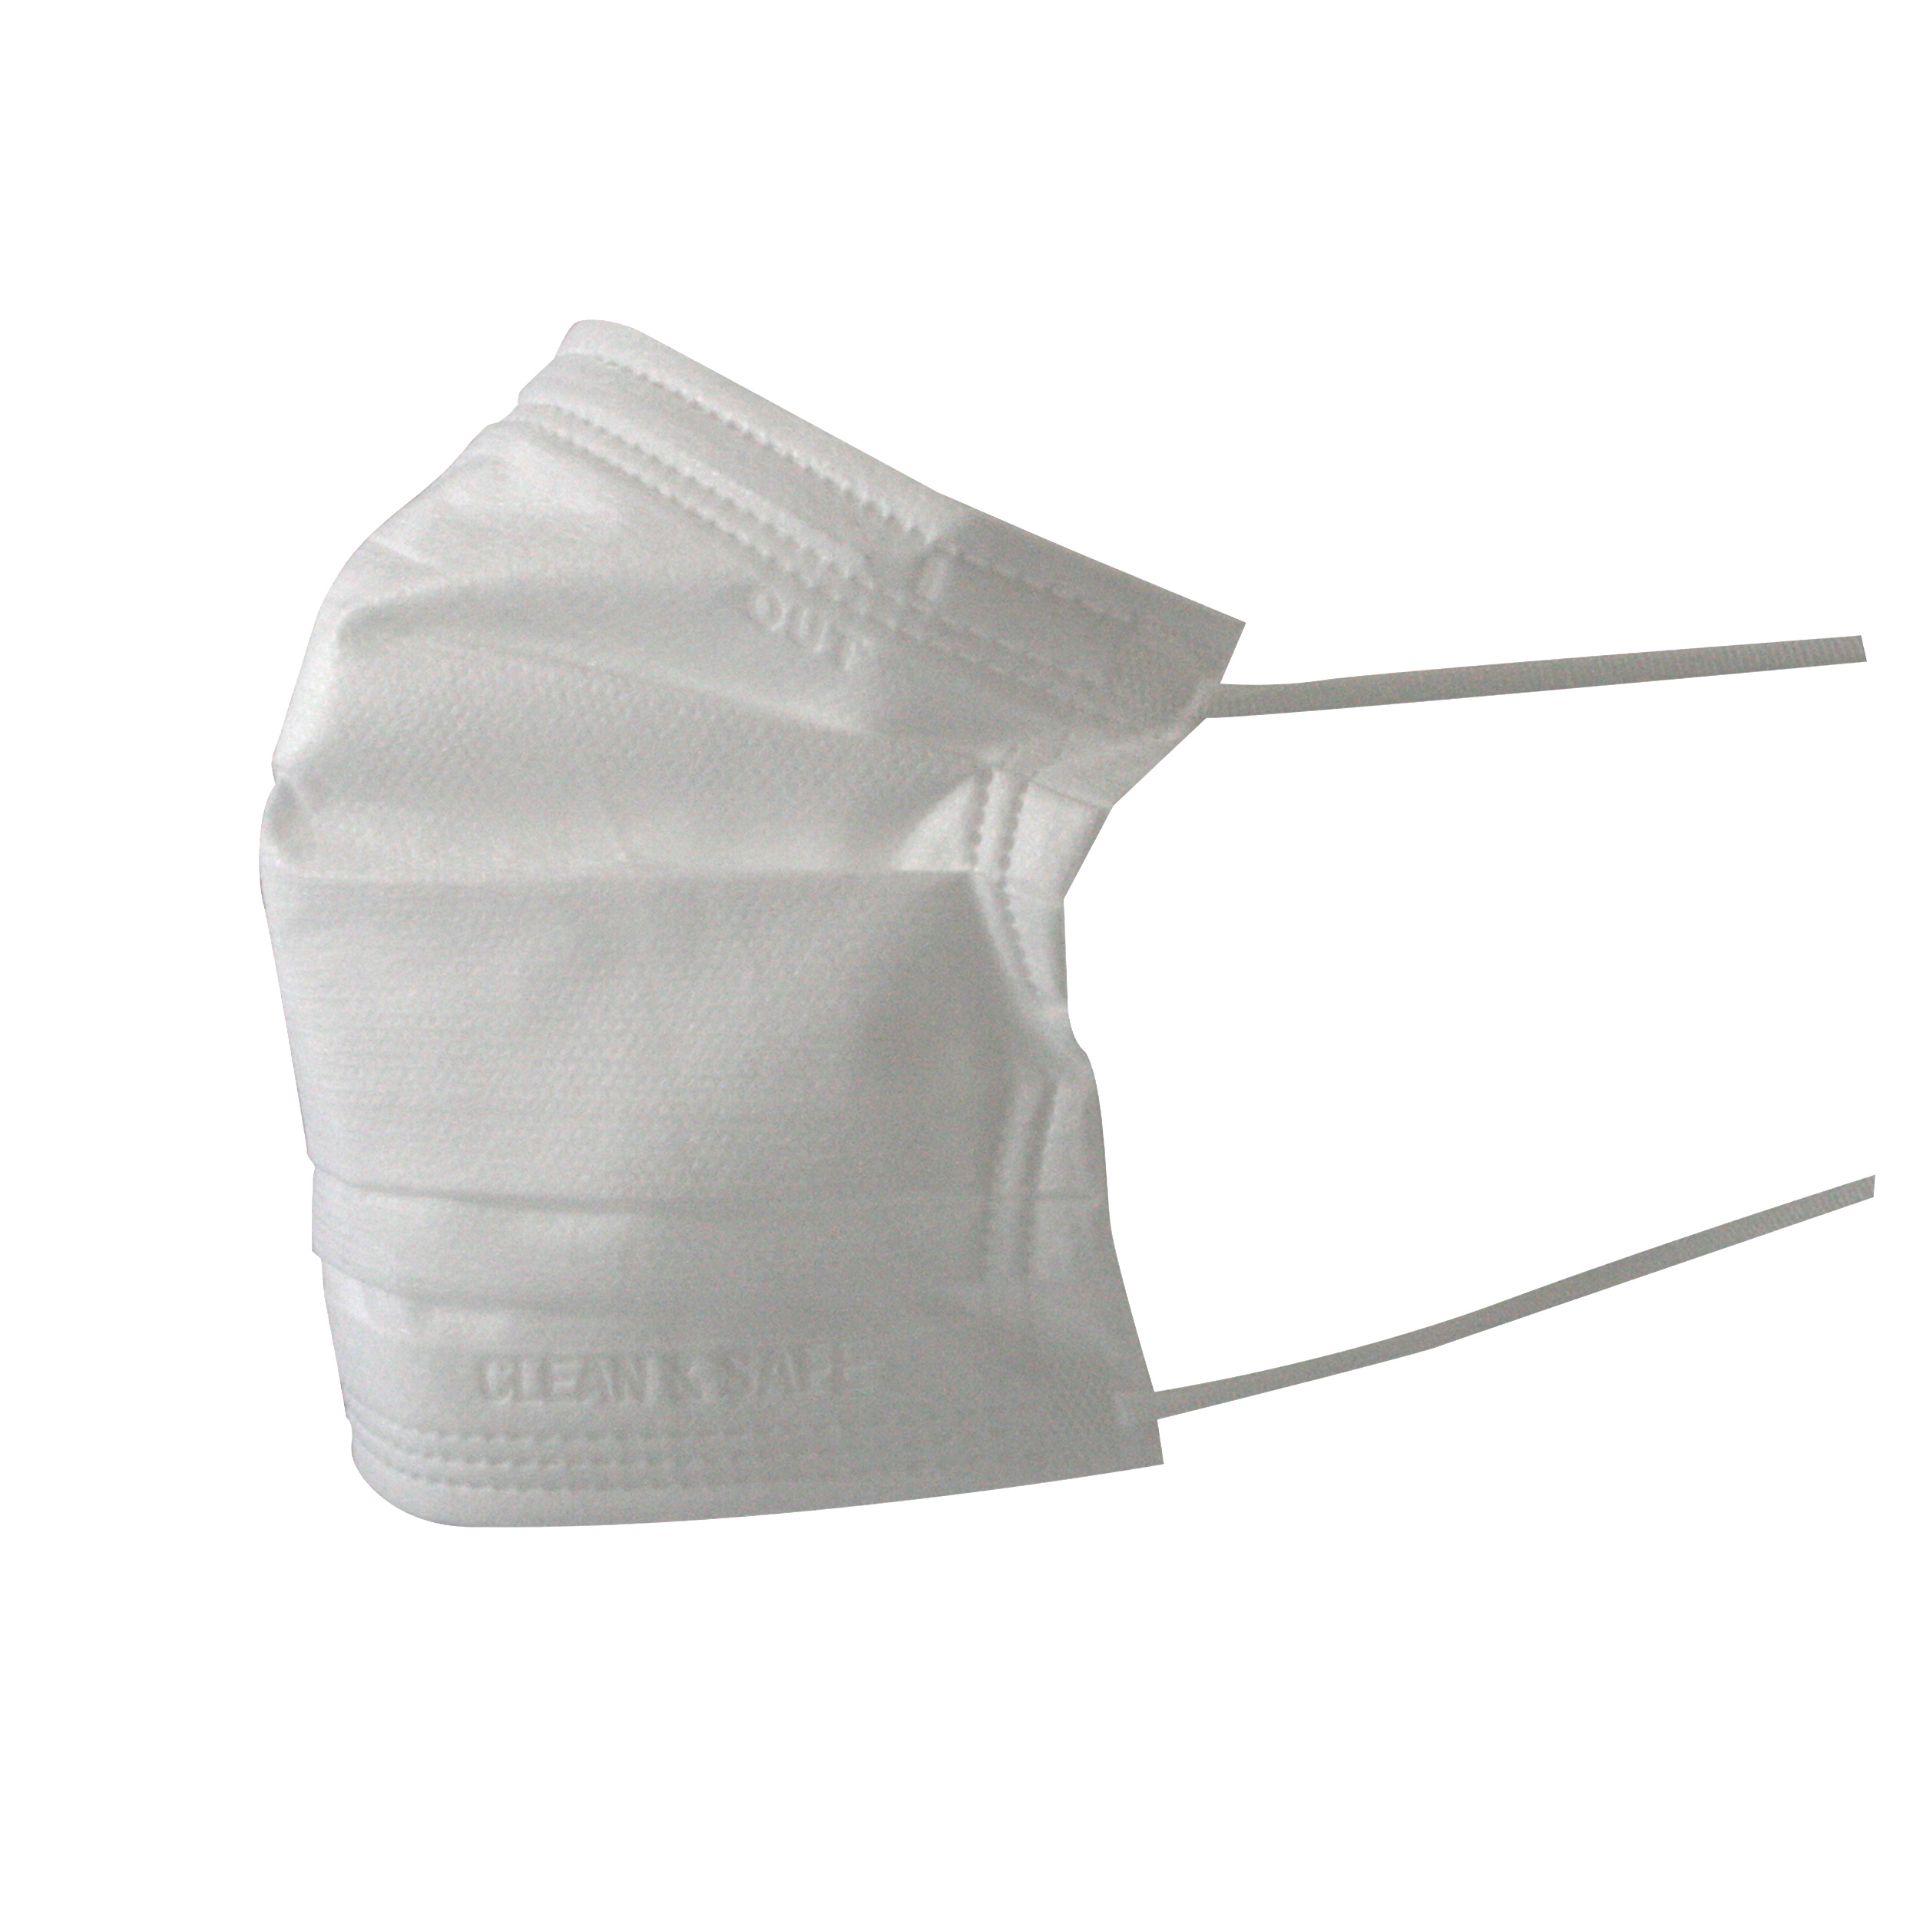 Medical Grade Type IIR disposable face masks: x 2000 - Image 5 of 5